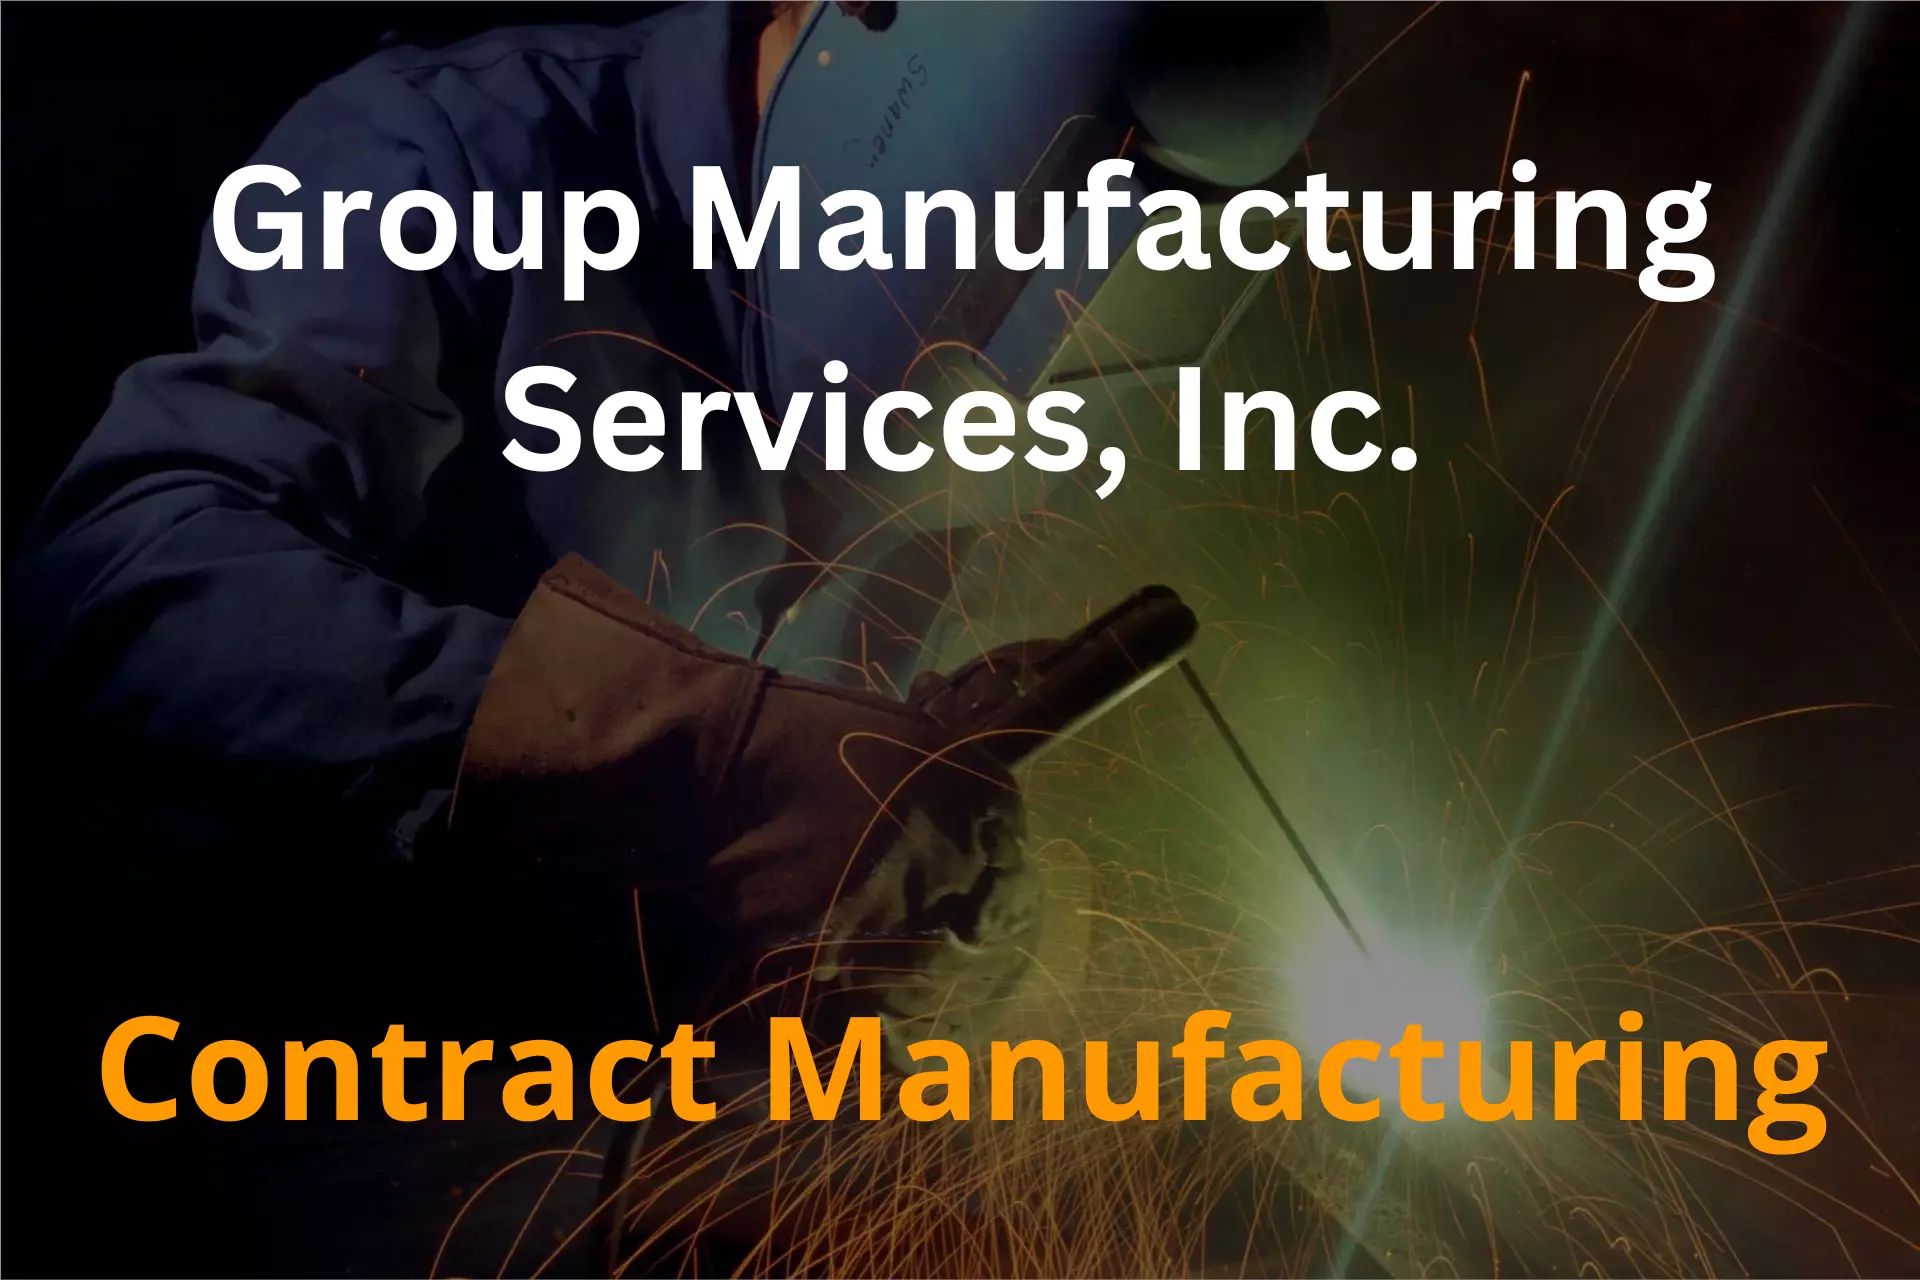 Contract Manufacturing Services | Group Manufacturing Services, Inc.